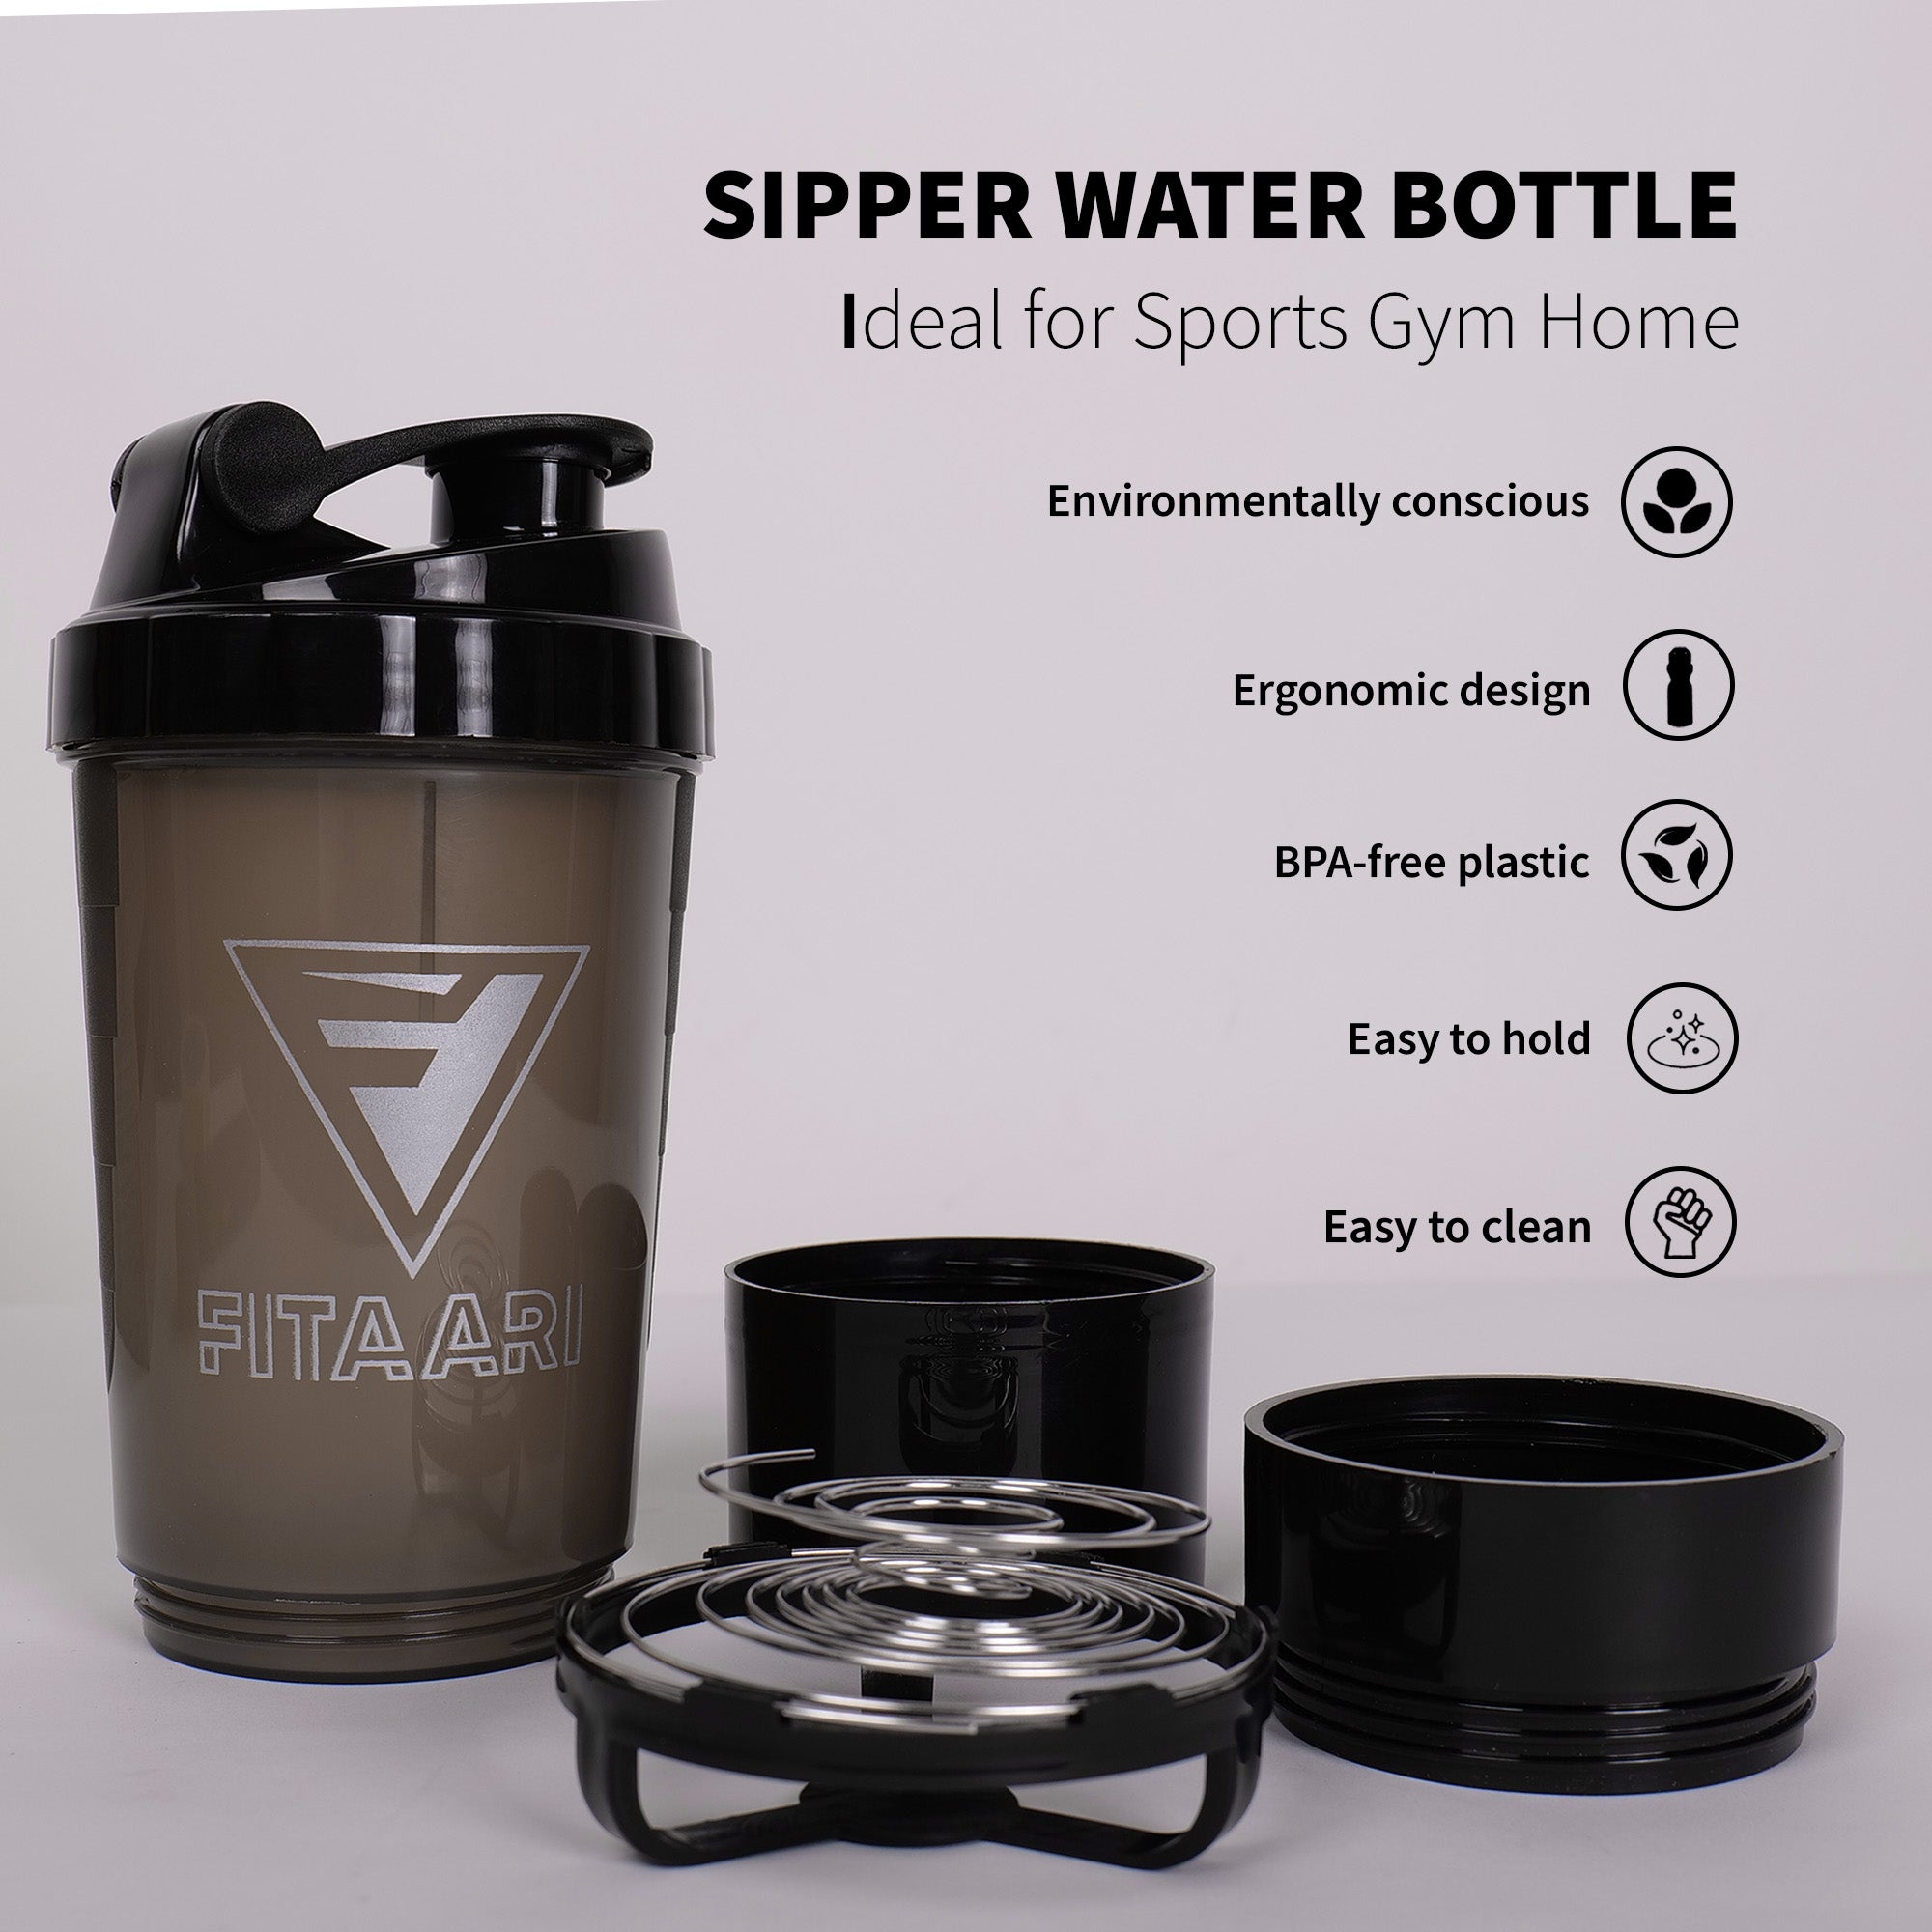 Fitaari Premium Shaker Bottle WIth Whey And Pill Container